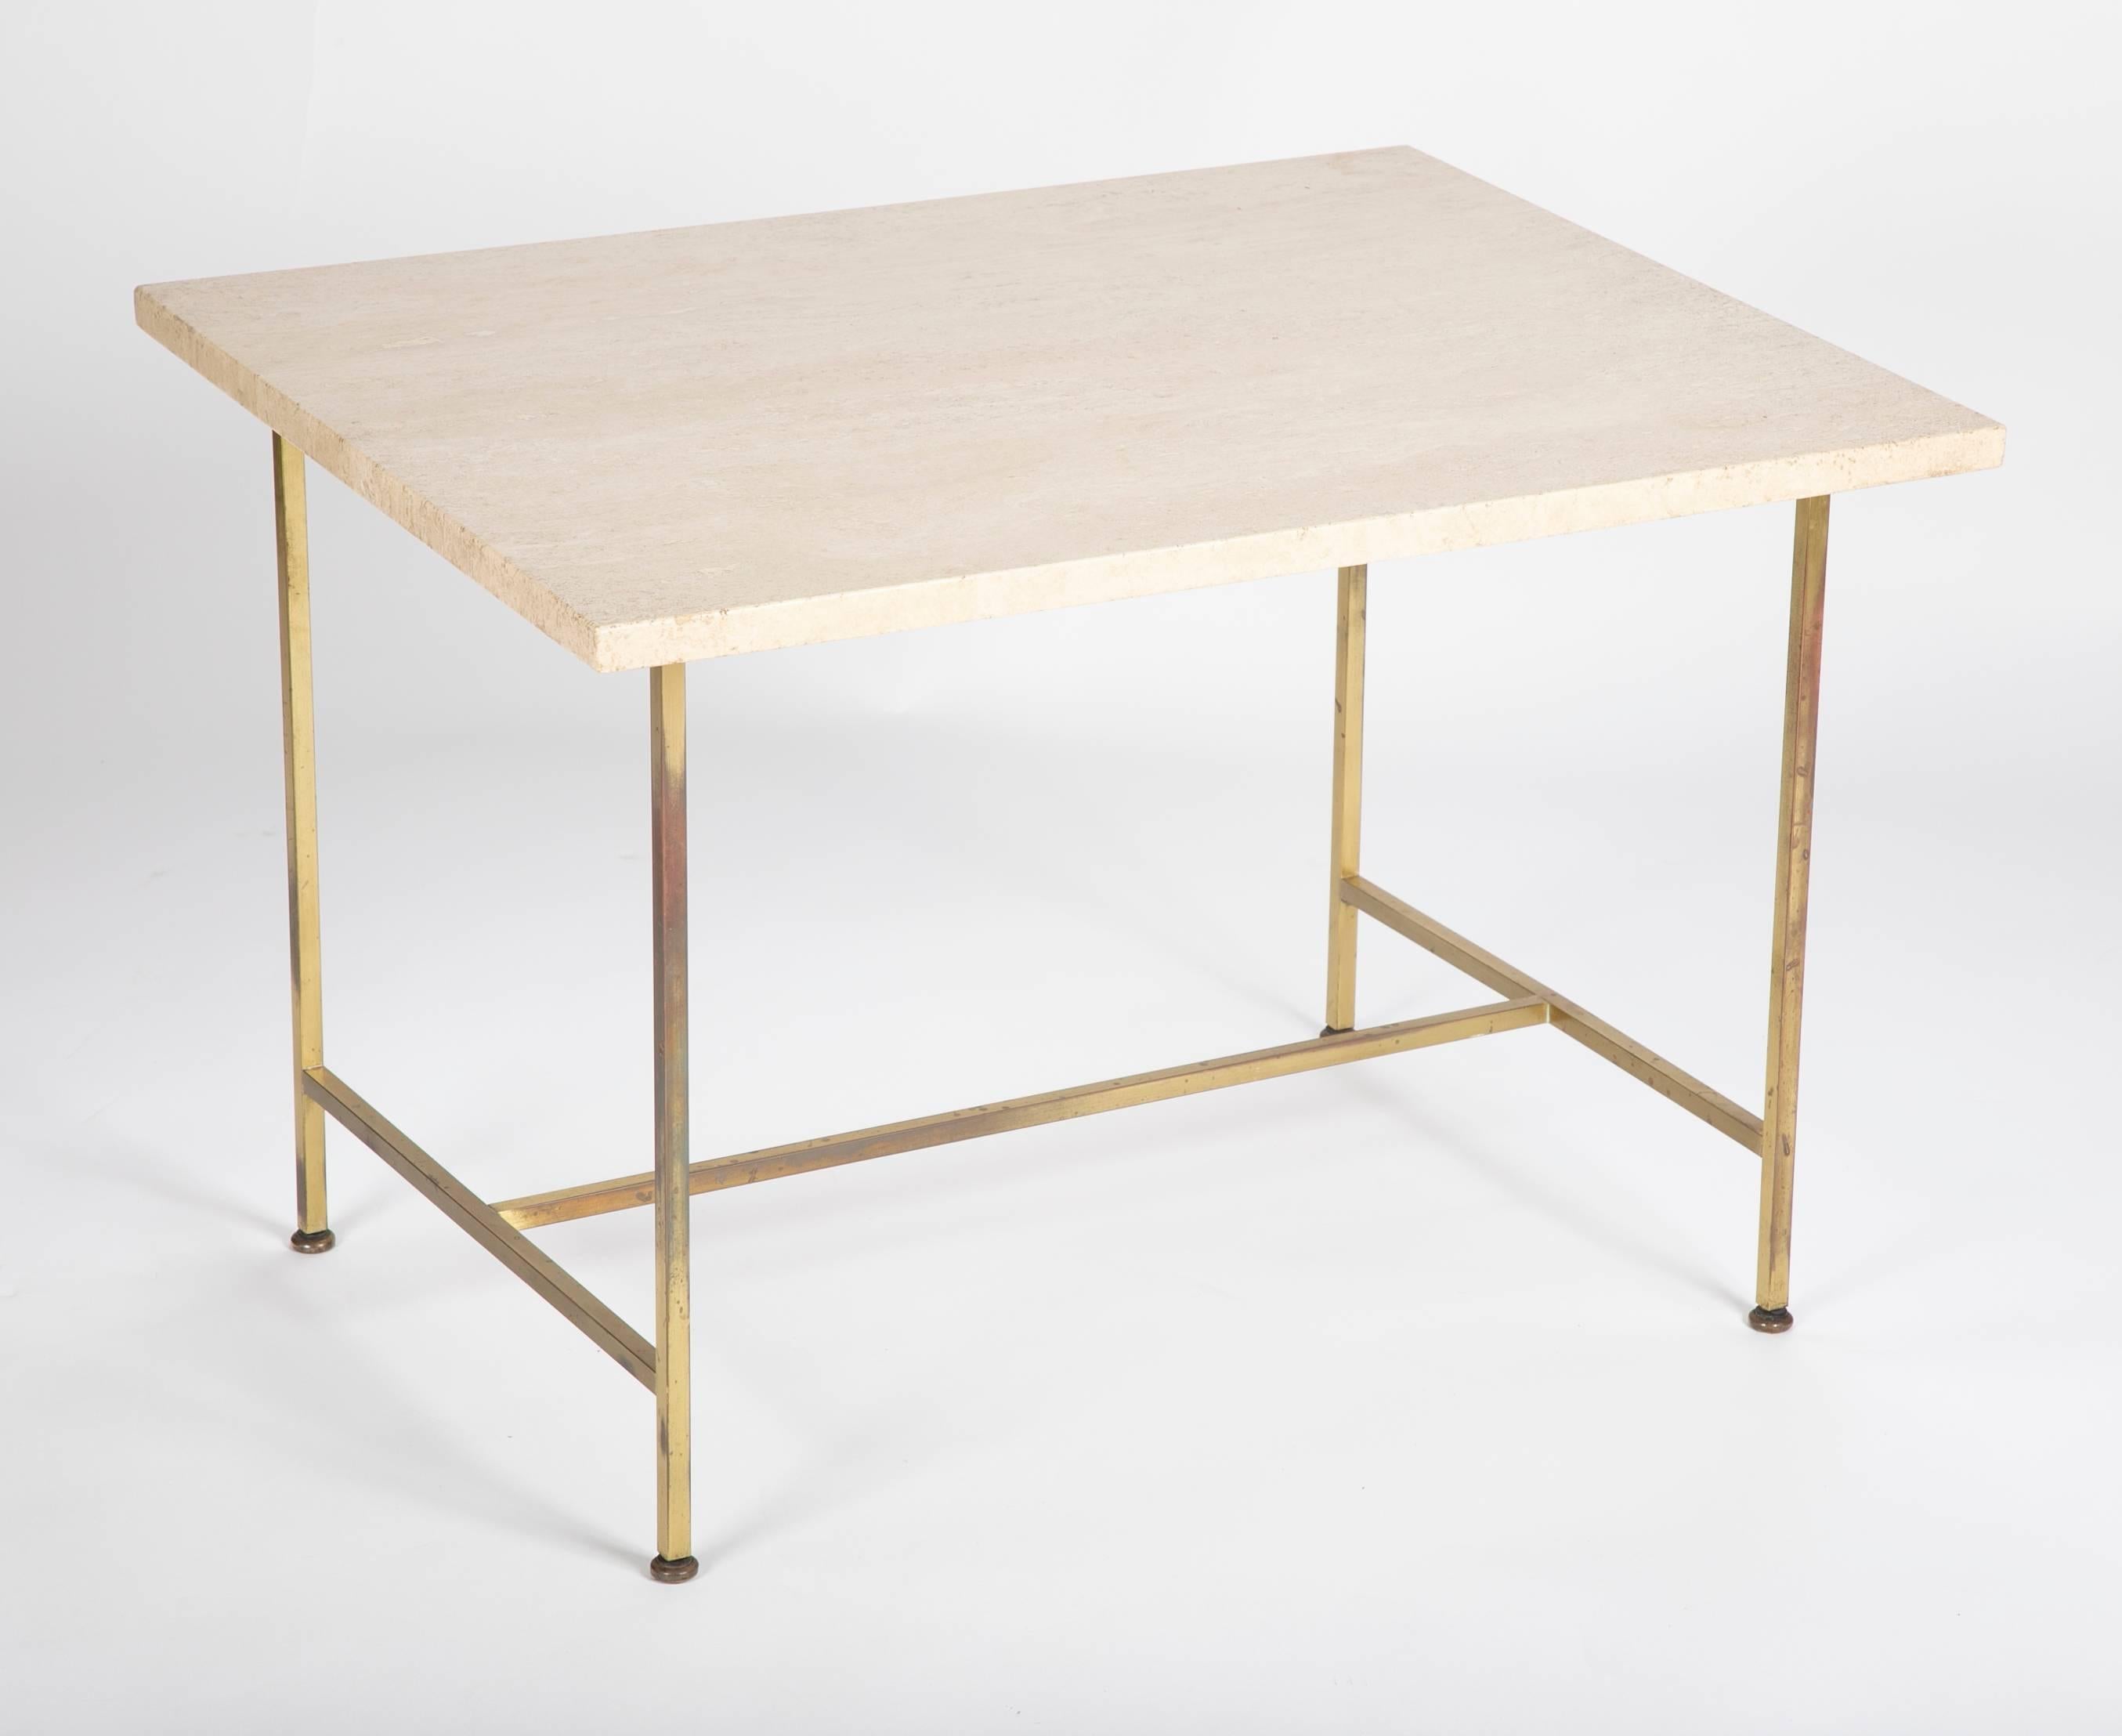 A brass and travertine side table designed by Paul McCobb.